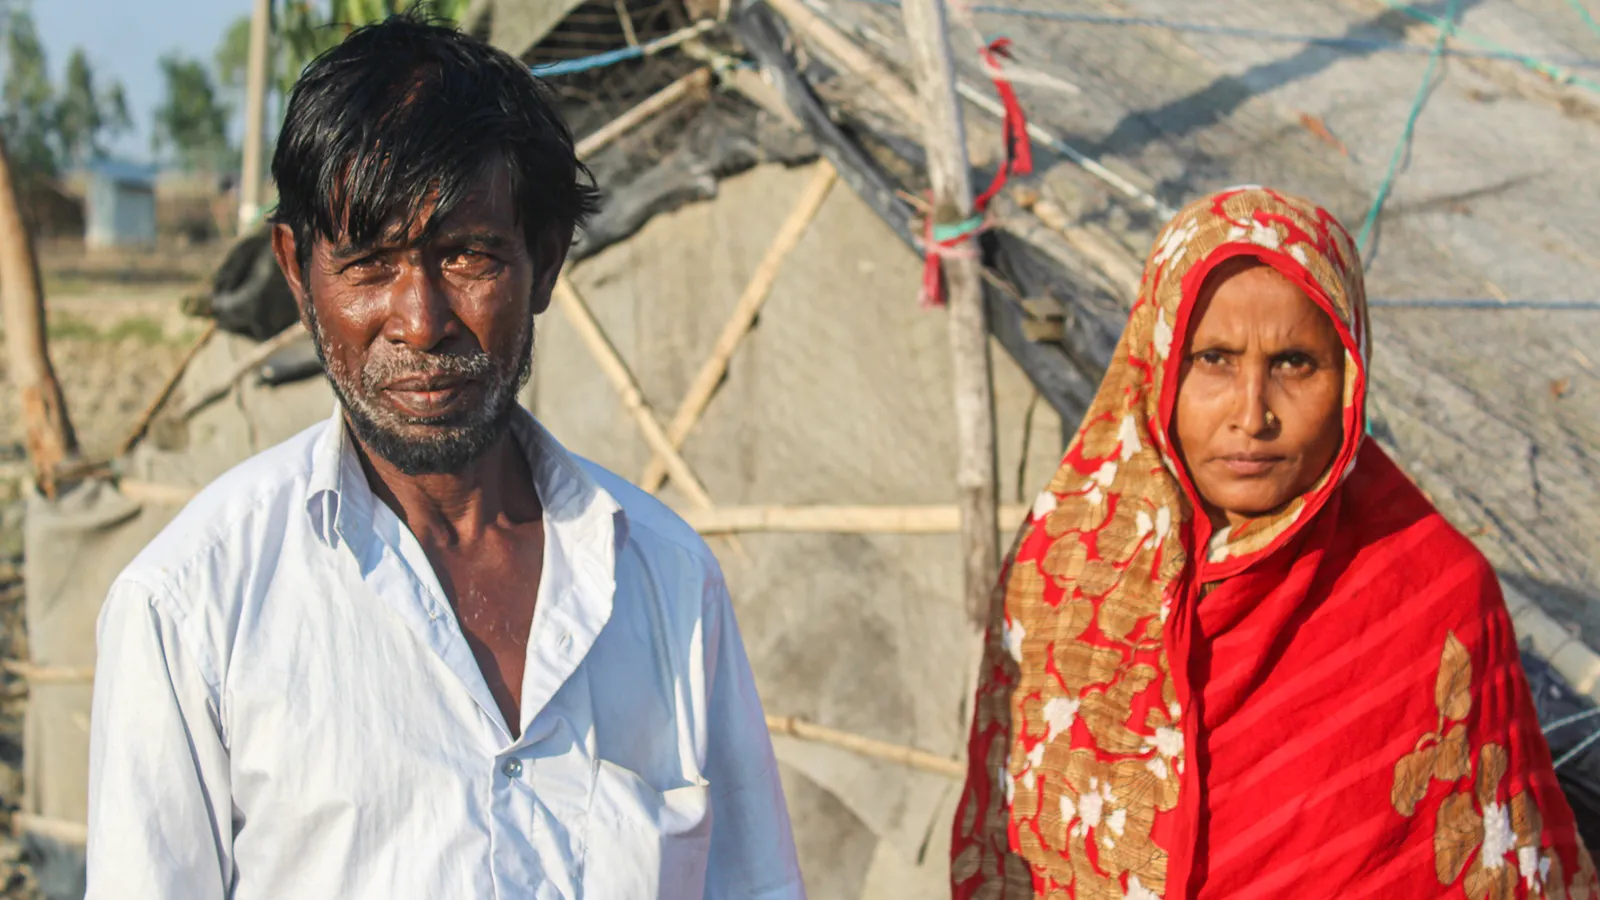 How Bangladesh is supporting climate refugees.